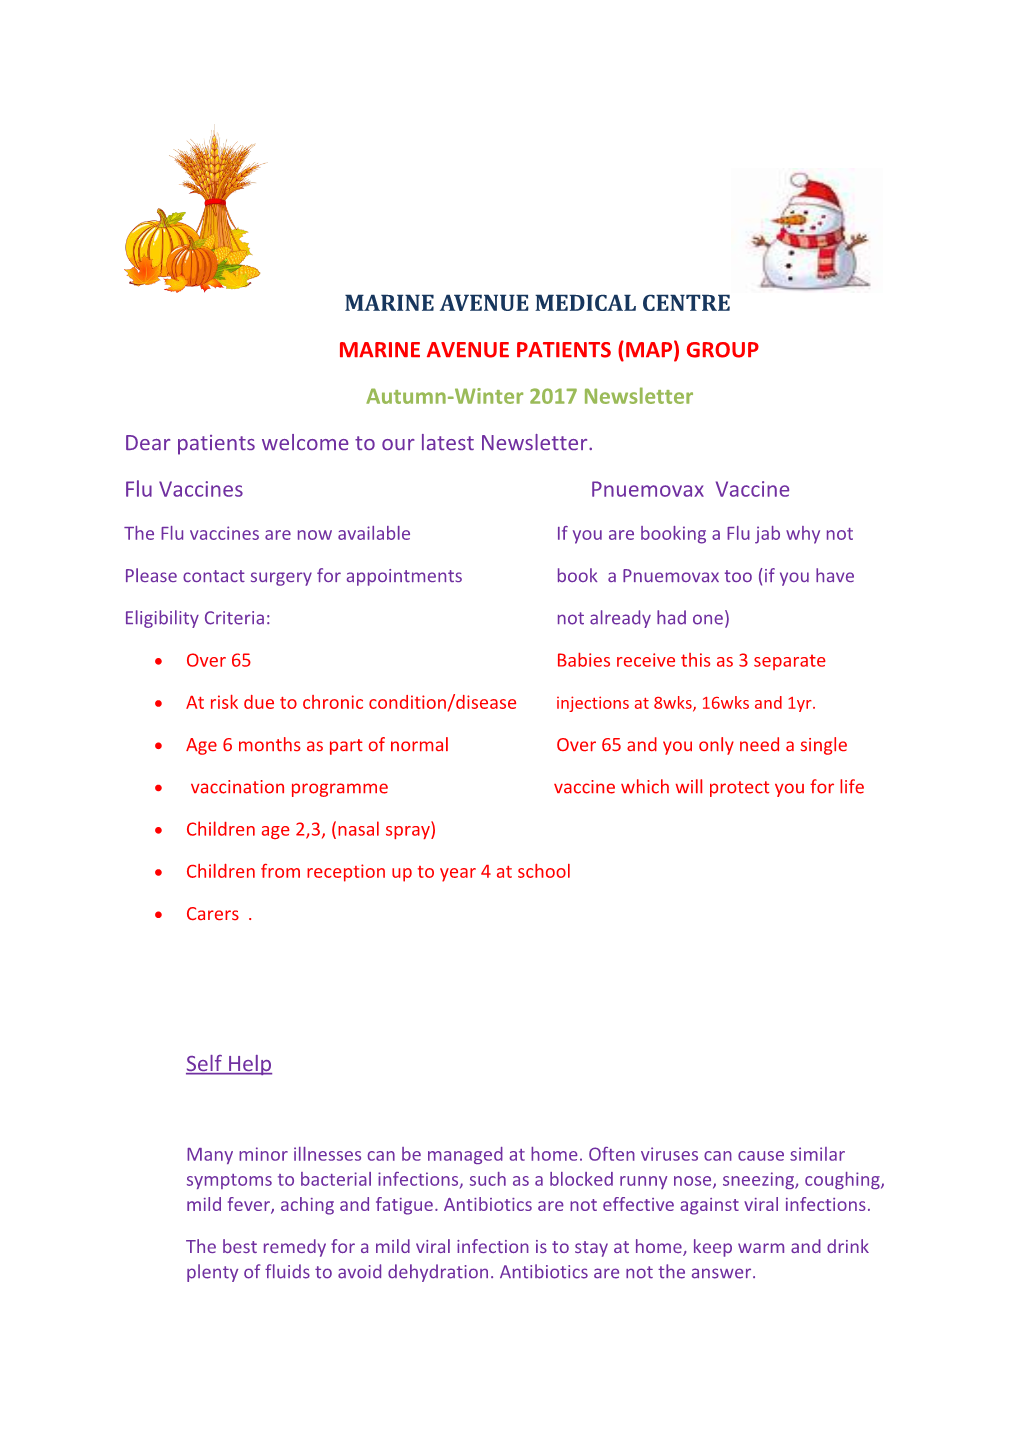 Dear Patients Welcome to Our Latest Newsletter